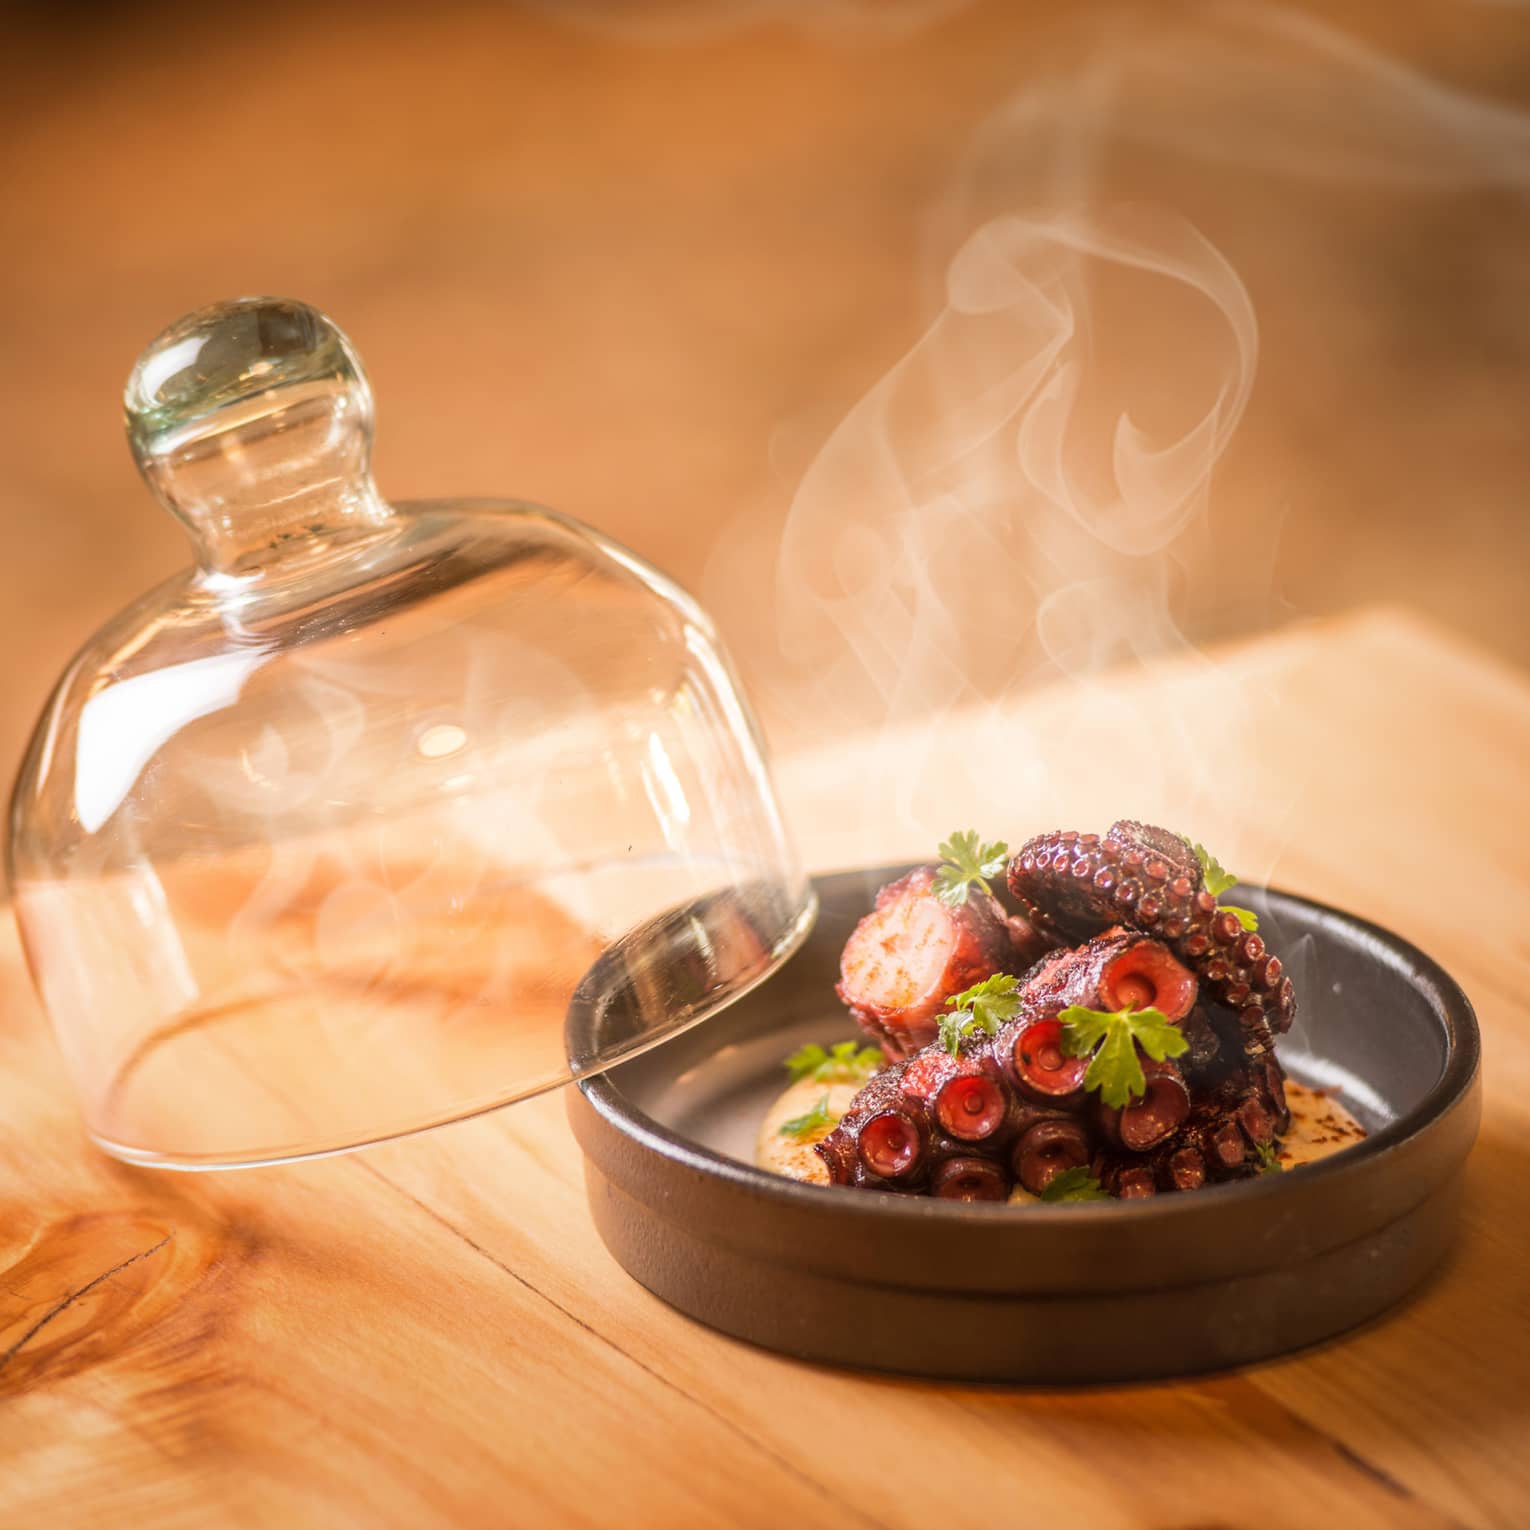 Steam rises from Grilled Octopus in round black dish with glass lid